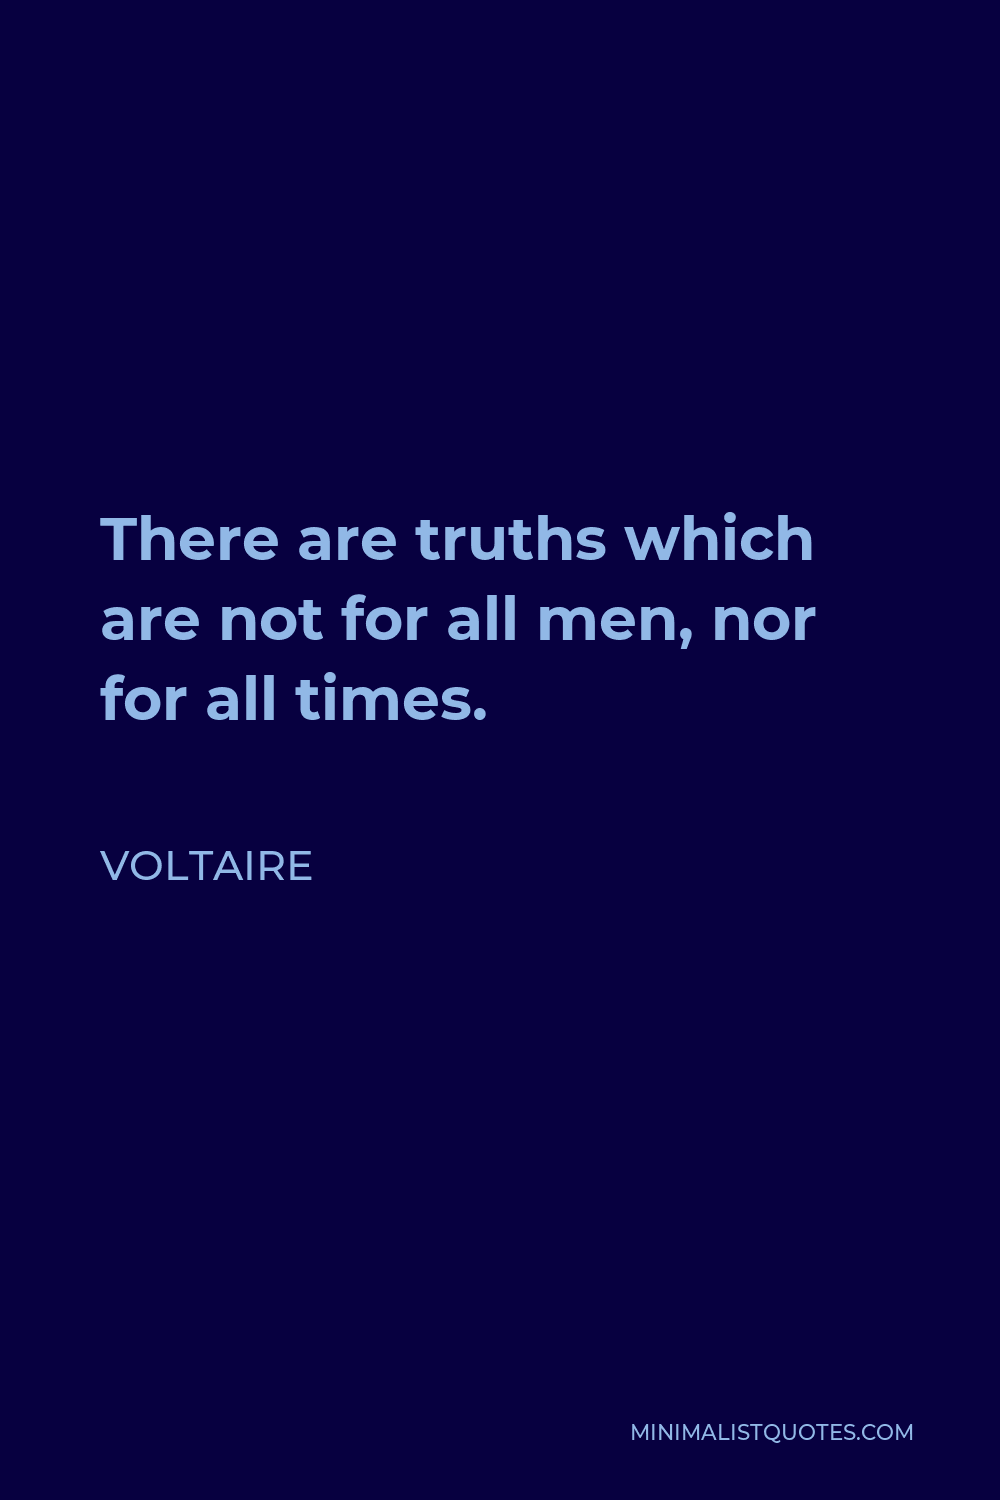 Voltaire Quote - There are truths which are not for all men, nor for all times.